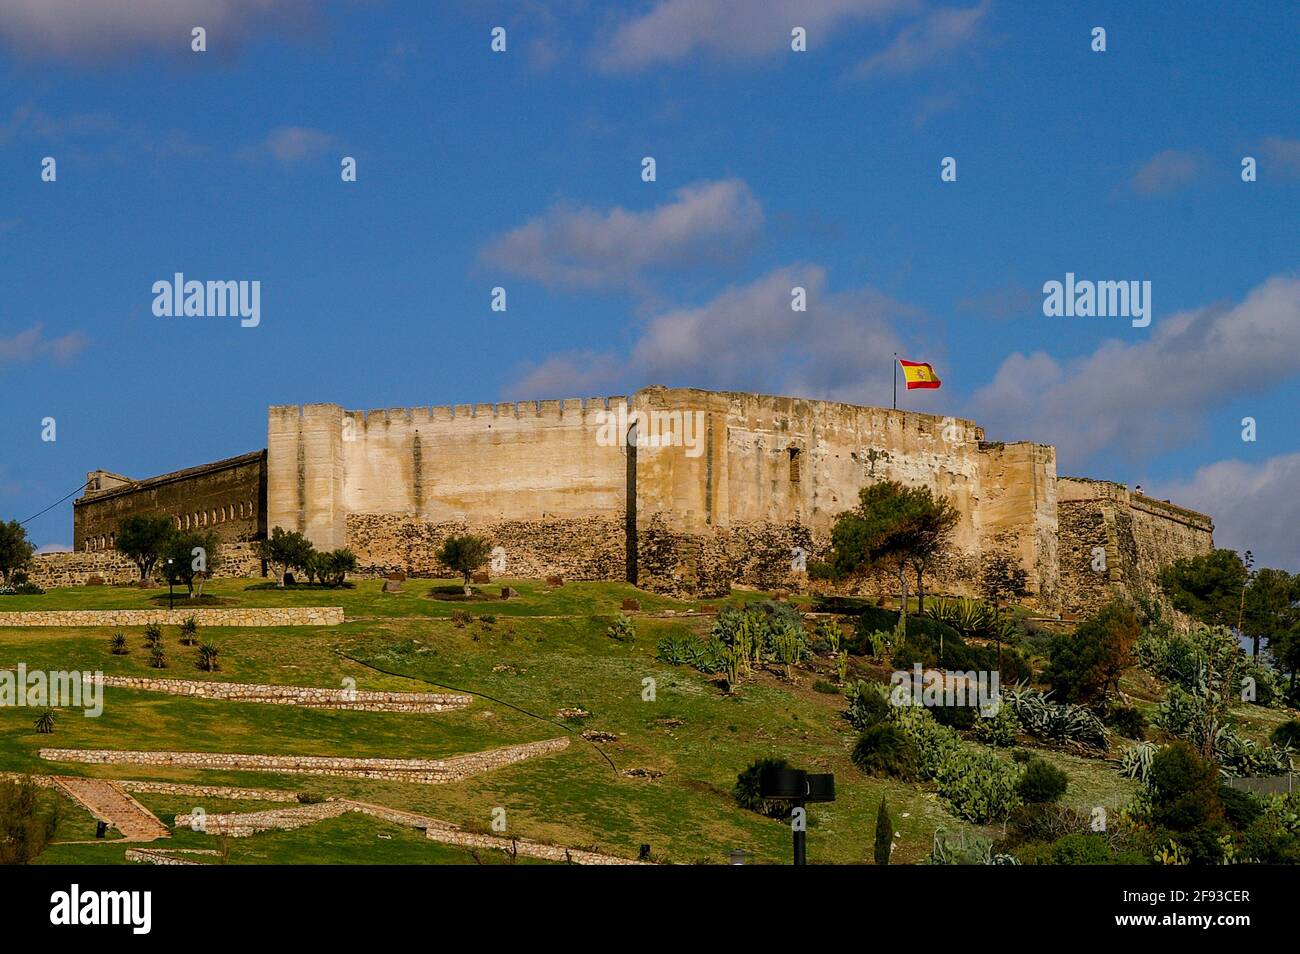 Castillo Sohail, Sohail Castle in Fuengirola, Spain. Province of Malage, Andalusia, on the Costa del Sol, high on a hill overlooking the Mediterranean Stock Photo